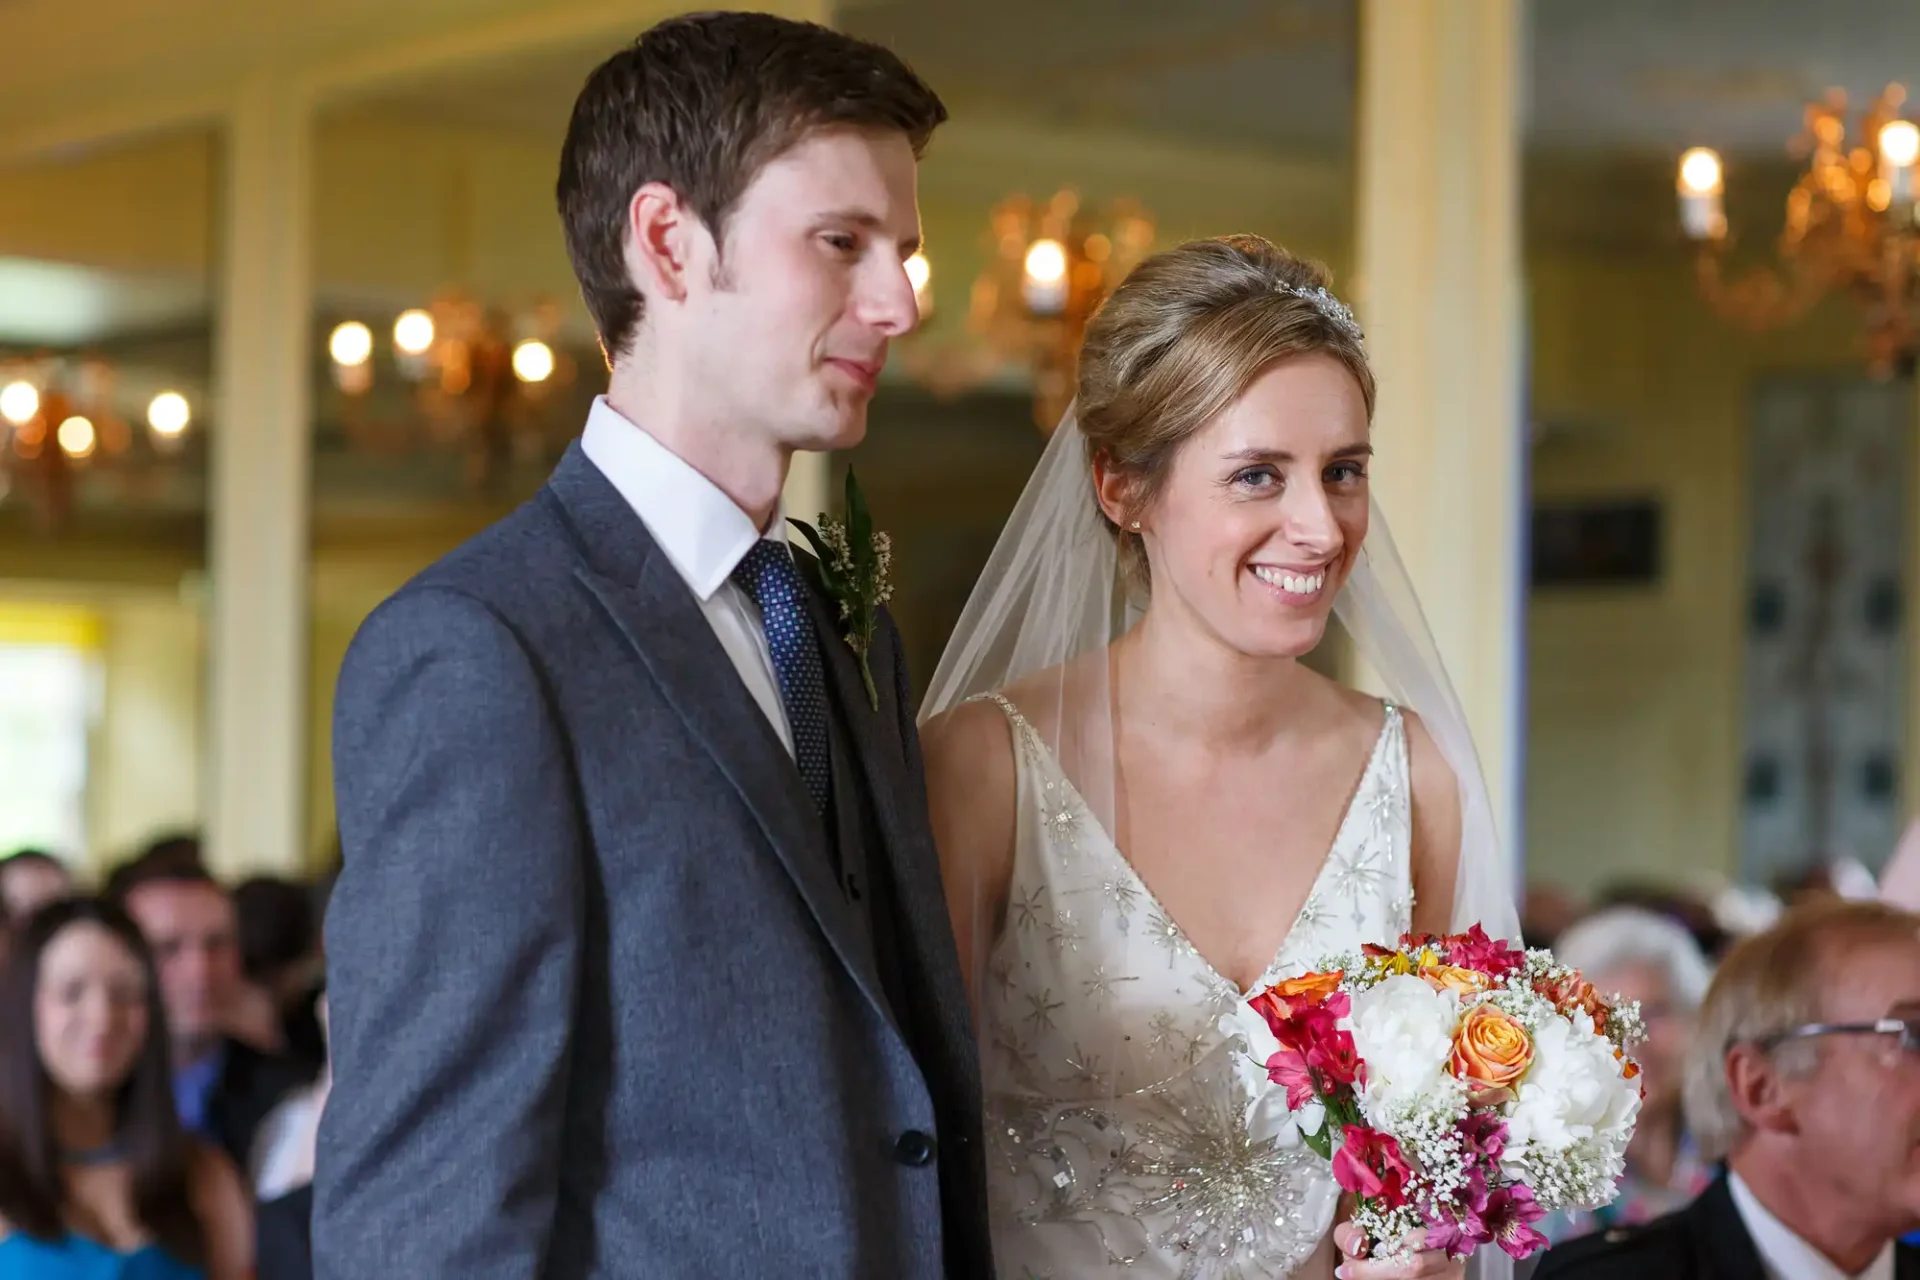 A bride and groom smiling, walking down the aisle, the bride holding a colorful bouquet, in a room filled with guests.